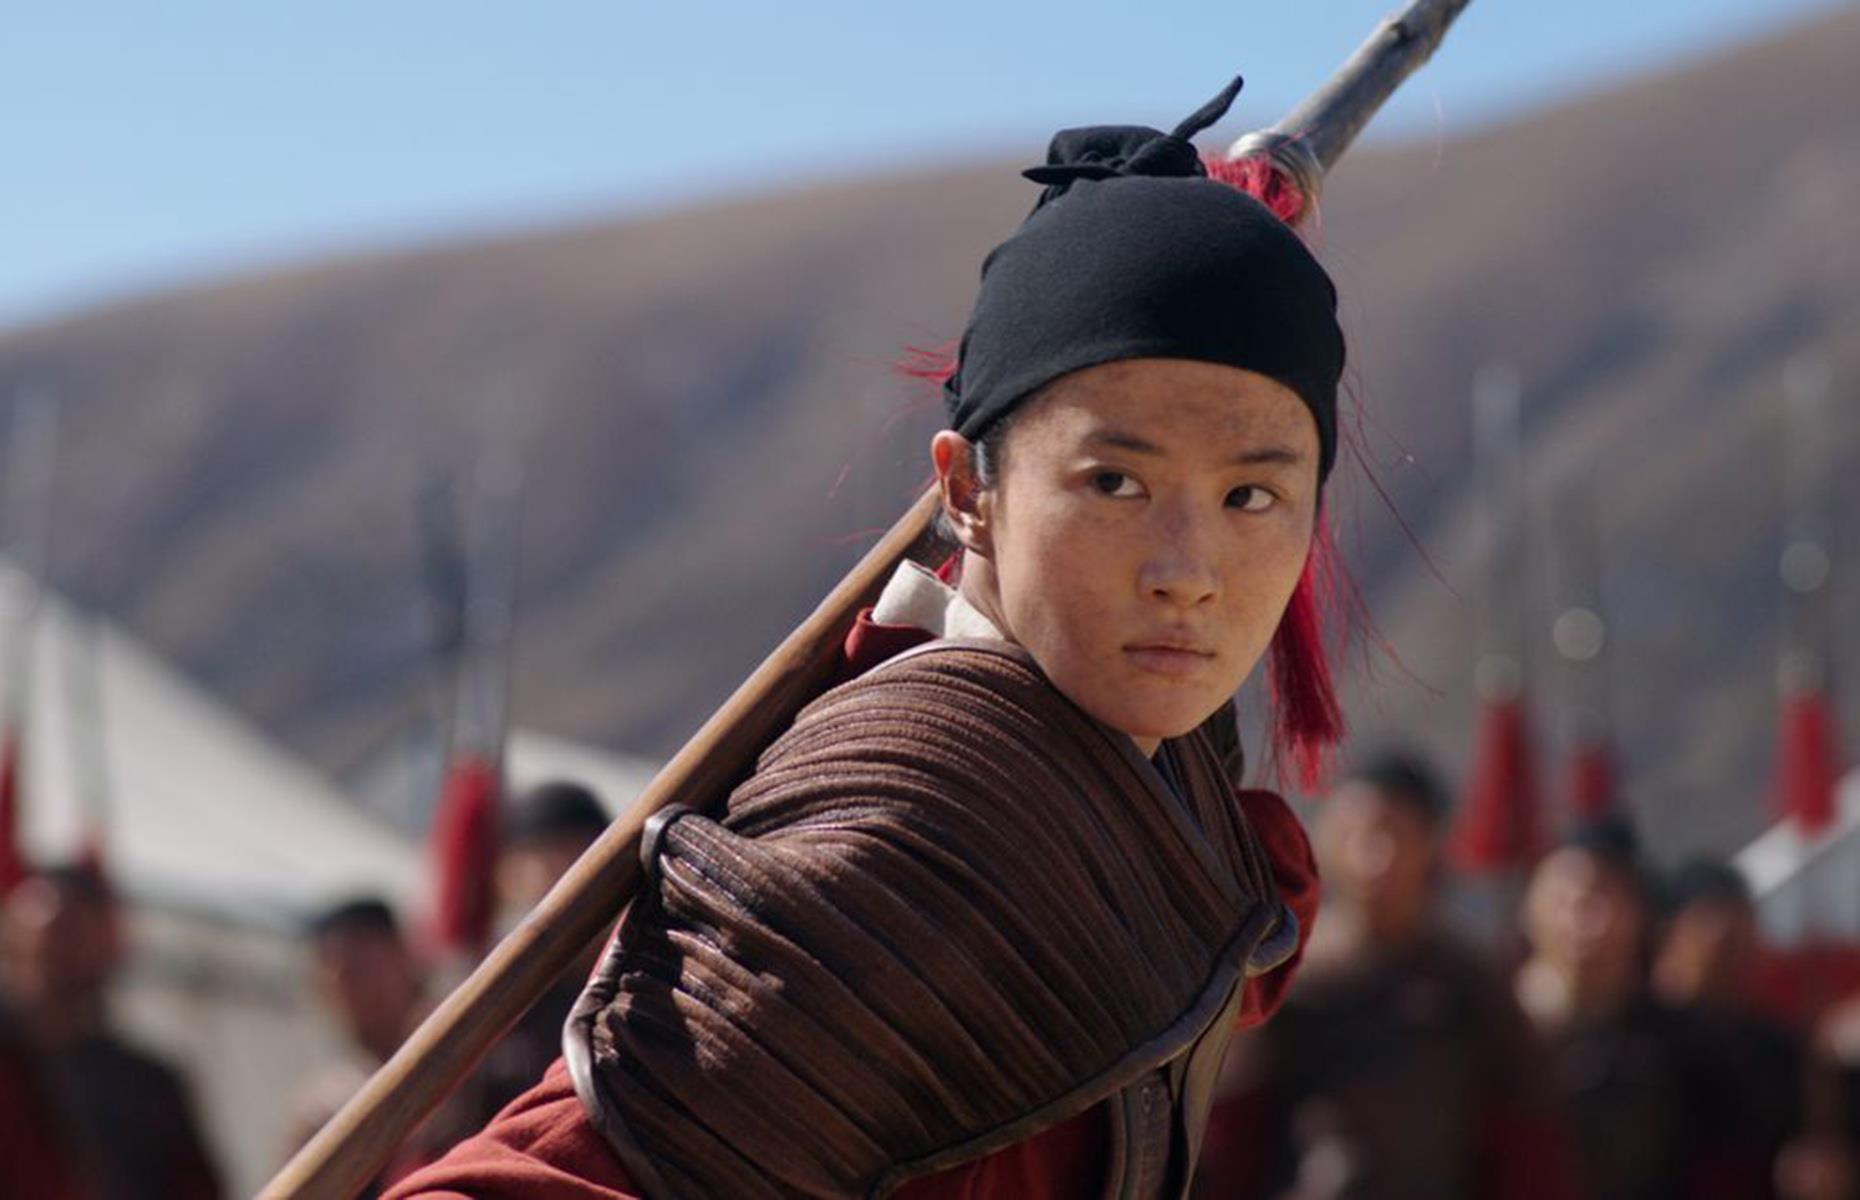 <p>Disney’s live-action remake of <em>Mulan</em> dropped in March 2020.</p>  <p>Unfortunately, it was released just as the COVID-19 pandemic swept the world, resulting in an understandably poor box office performance that saw it gross just $70 million against its whopping $200 million production budget. </p>  <p>While the film later became a hit on the streaming platform Disney+, allowing the studio to recover some of its losses, it still wasn't enough. All in all, <em>Mulan</em> is estimated to have lost the studio between $140 million and $150 million, with some experts even suggesting that audiences have grown tired of live-action remakes of beloved Disney classics. </p>